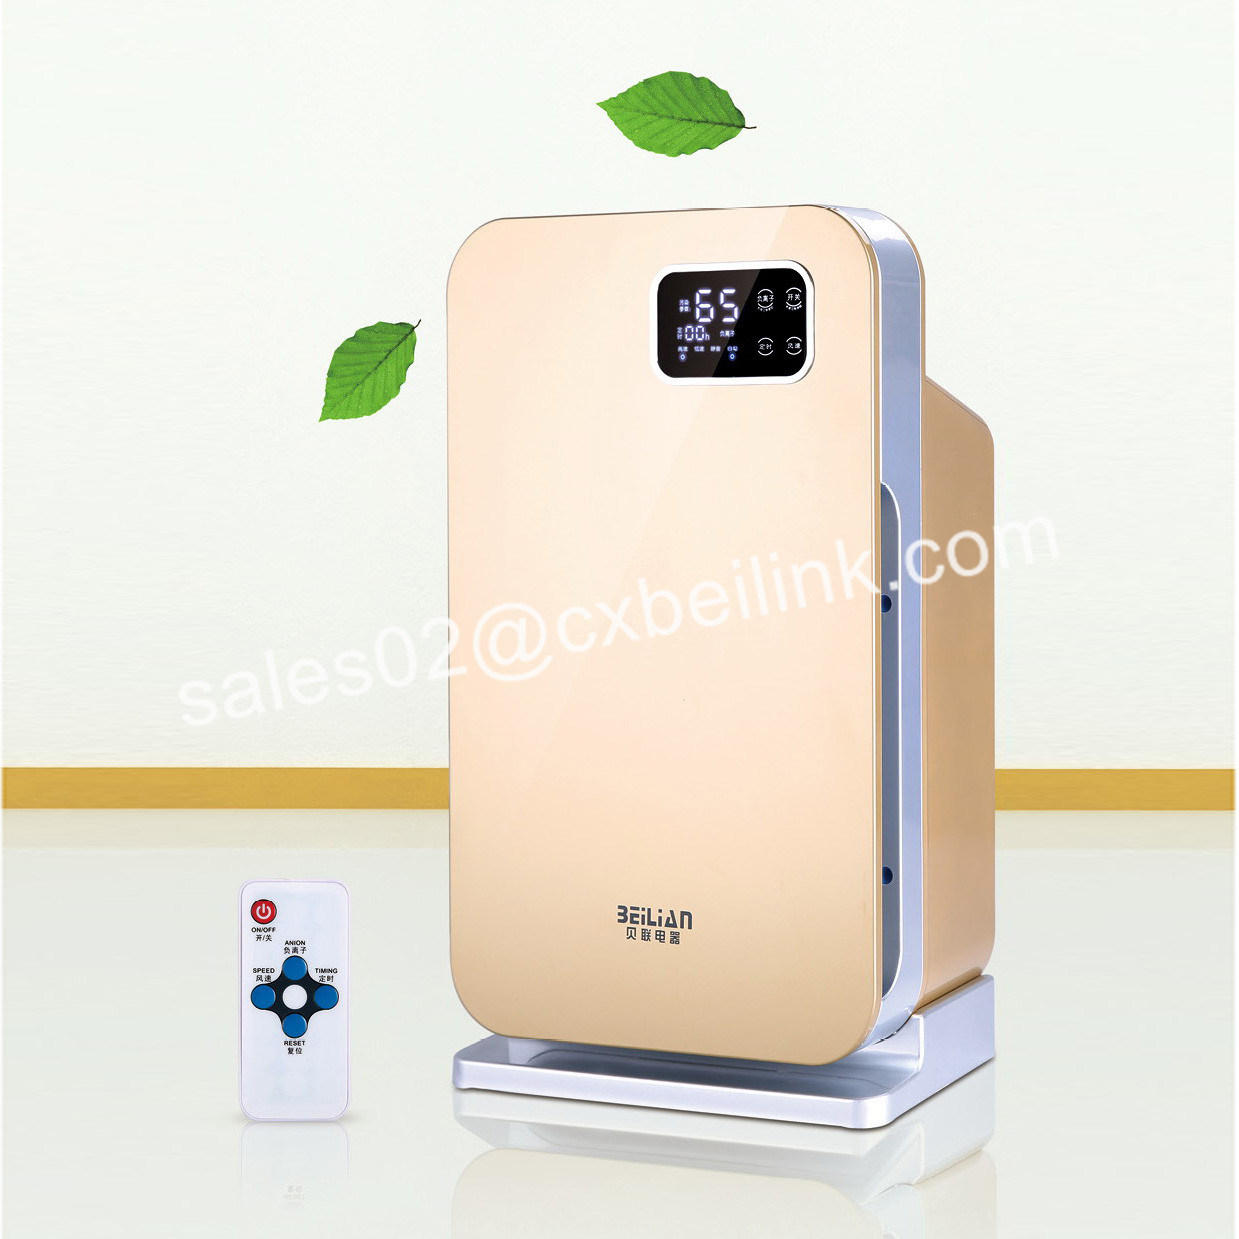 Smart Home Air Purifier Bk-05 with LCD Display